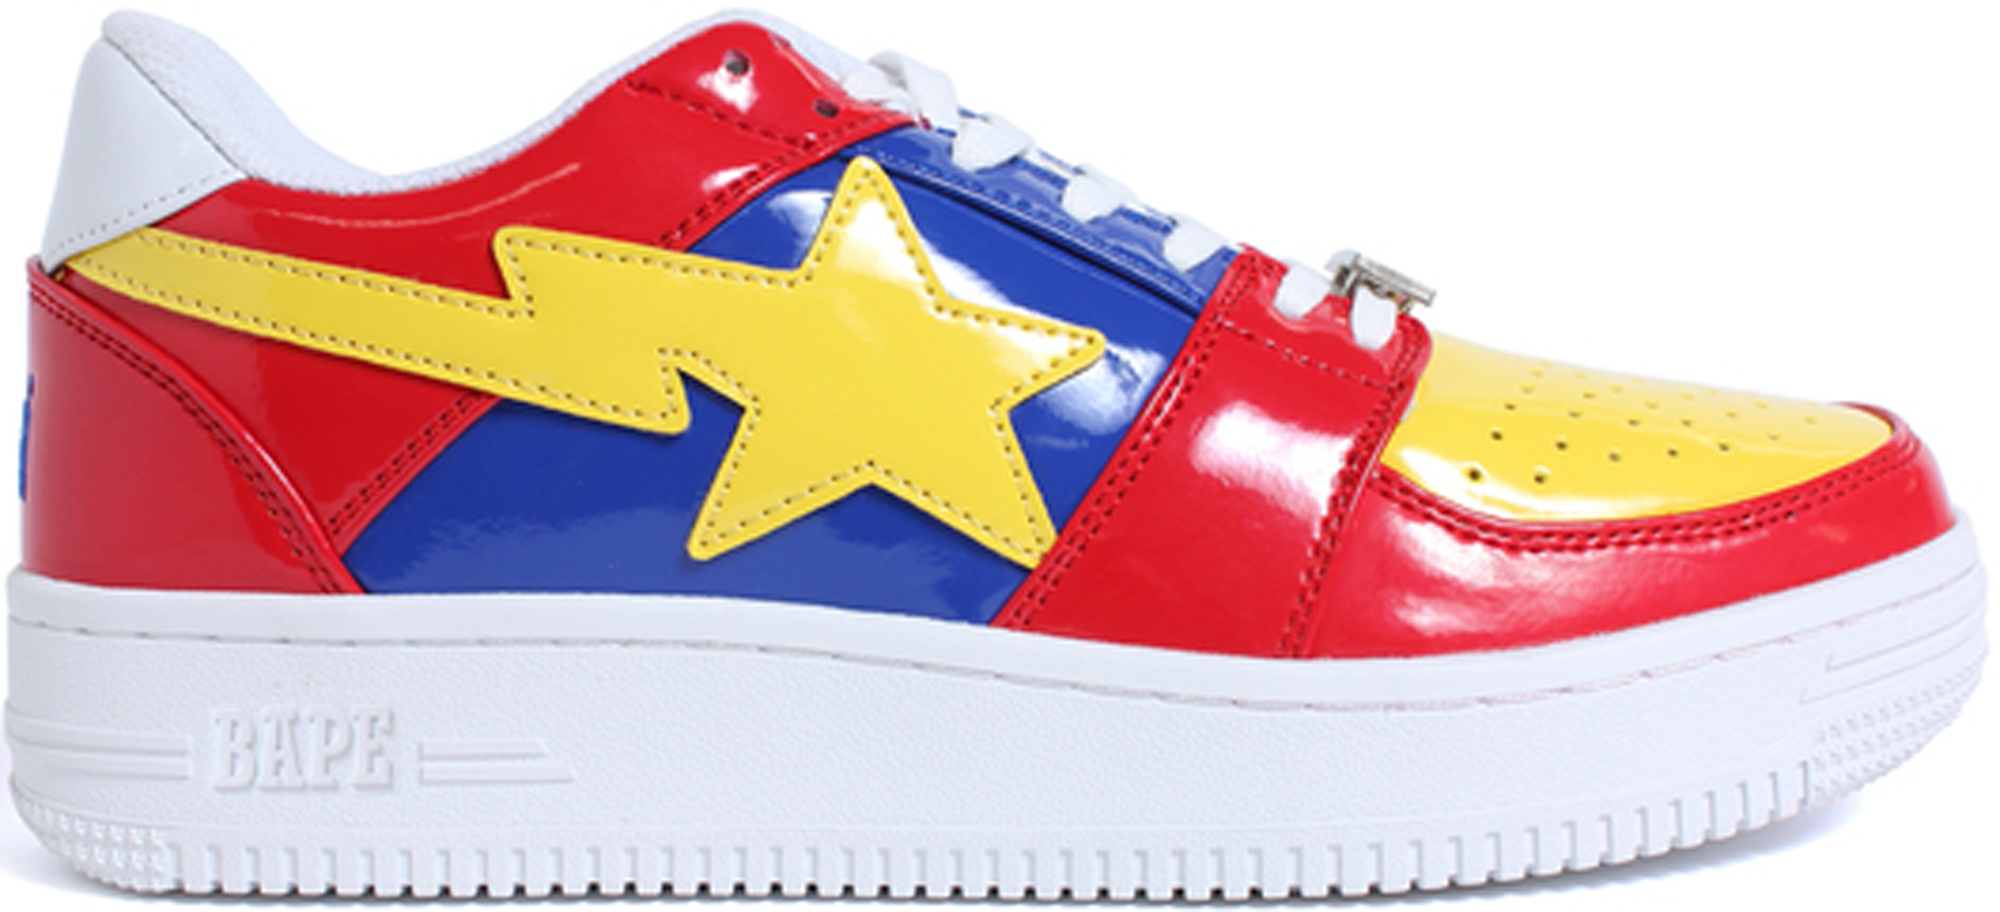 red blue yellow sneakers